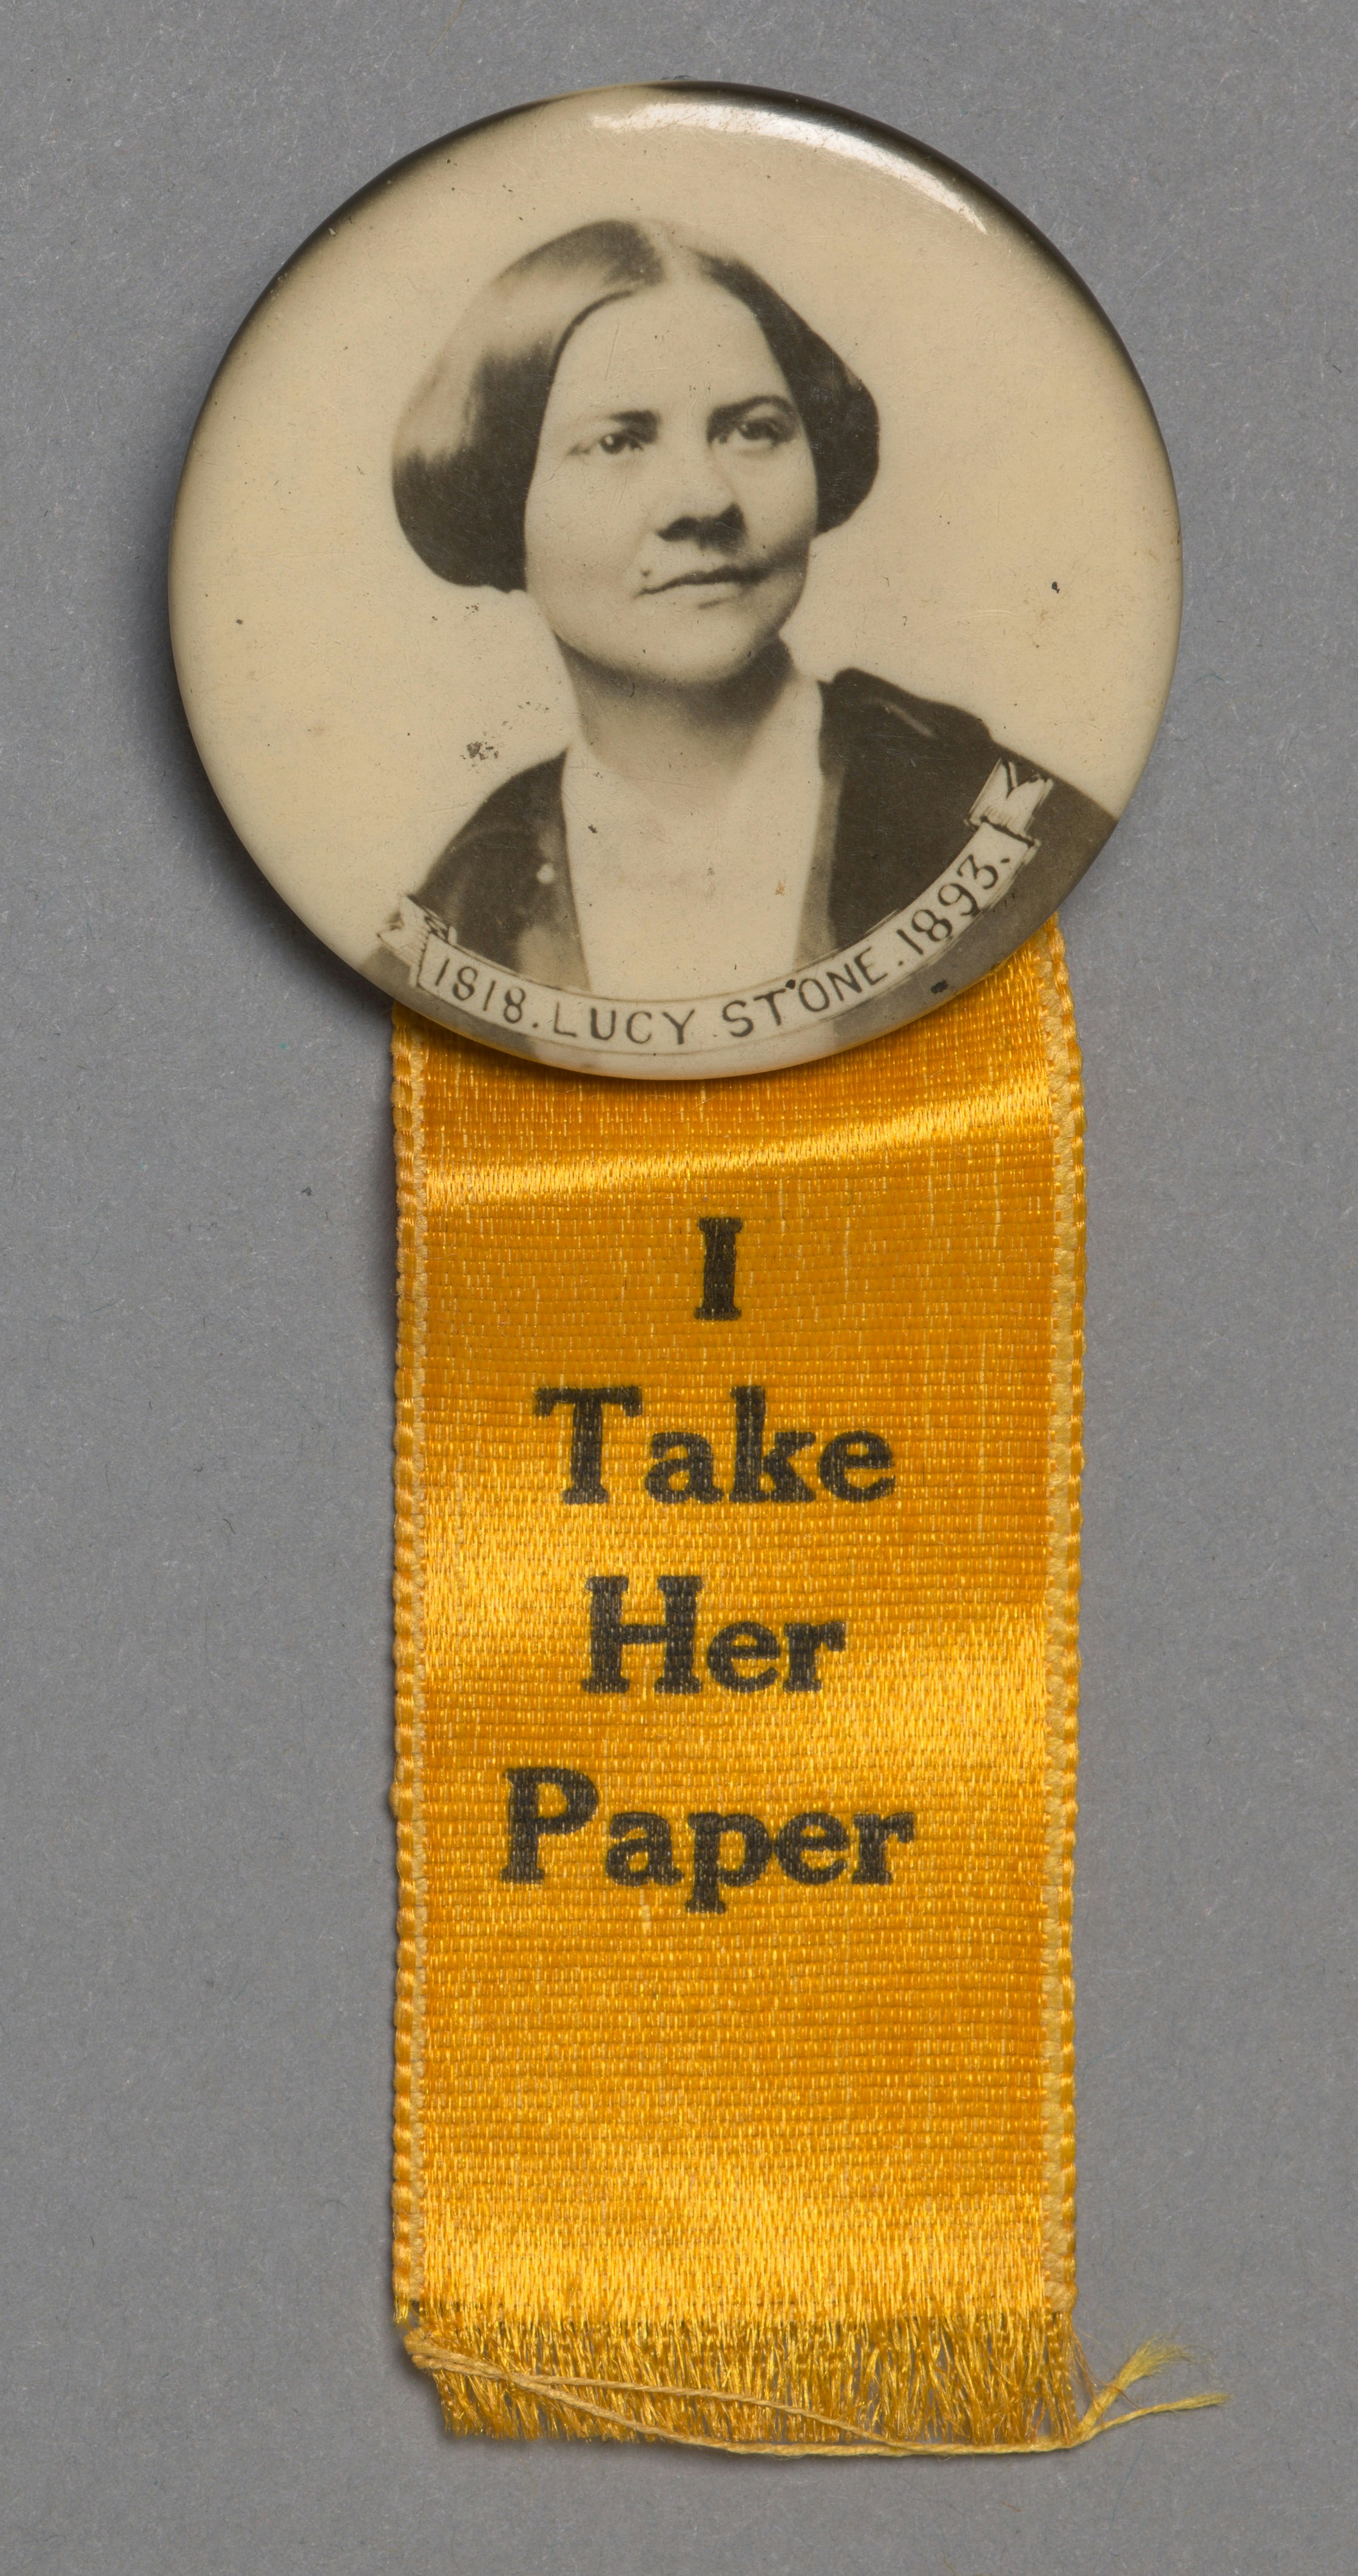 Woman's Journal button with portrait of Lucy Stone